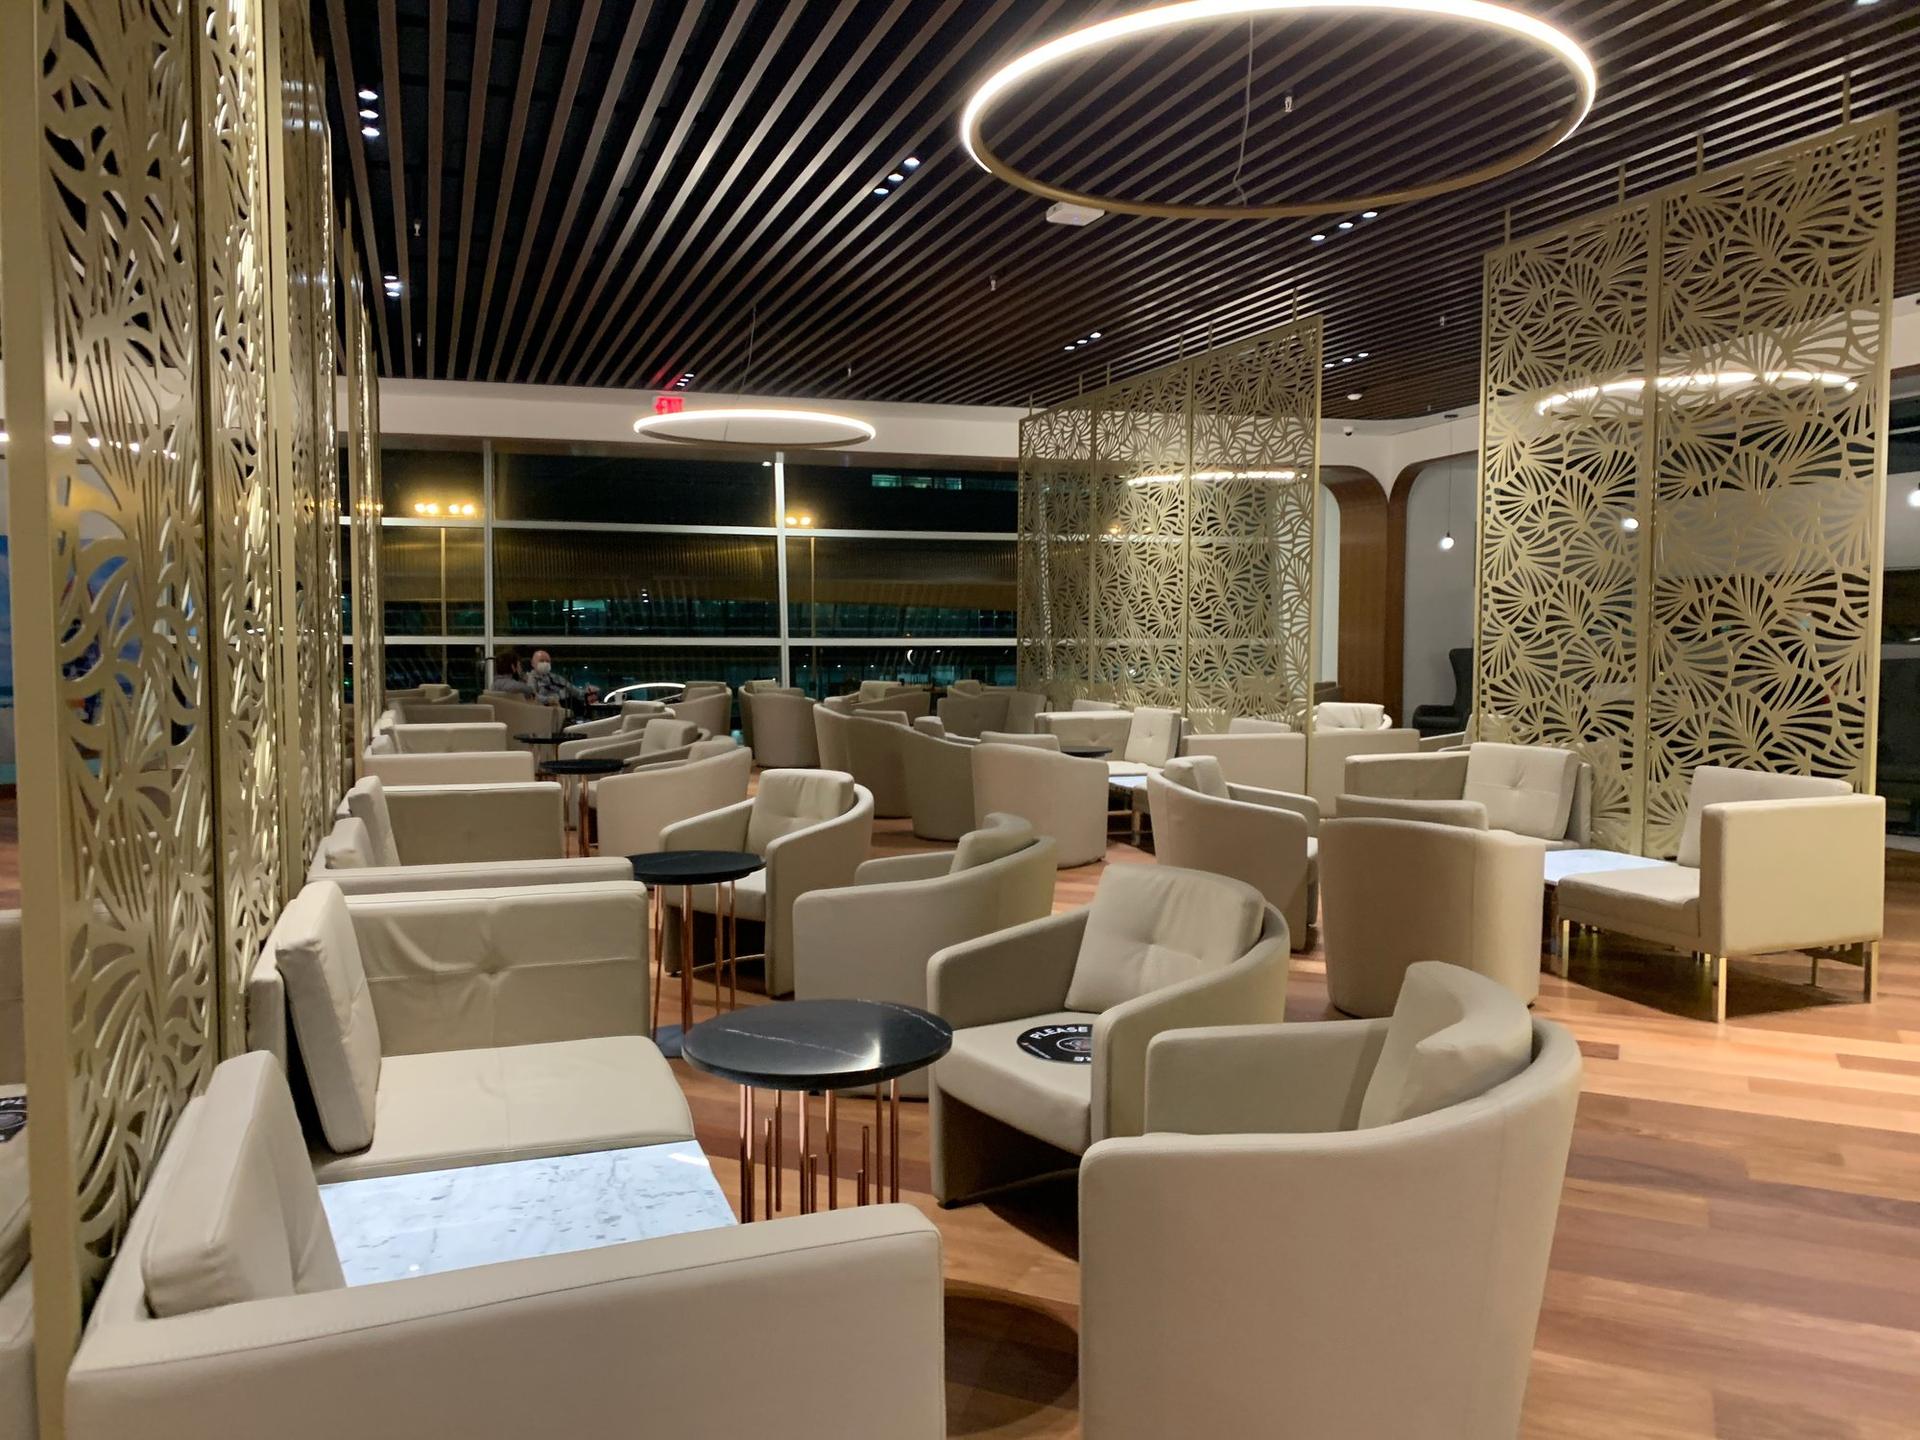 Turkish Airlines Lounge image 8 of 8